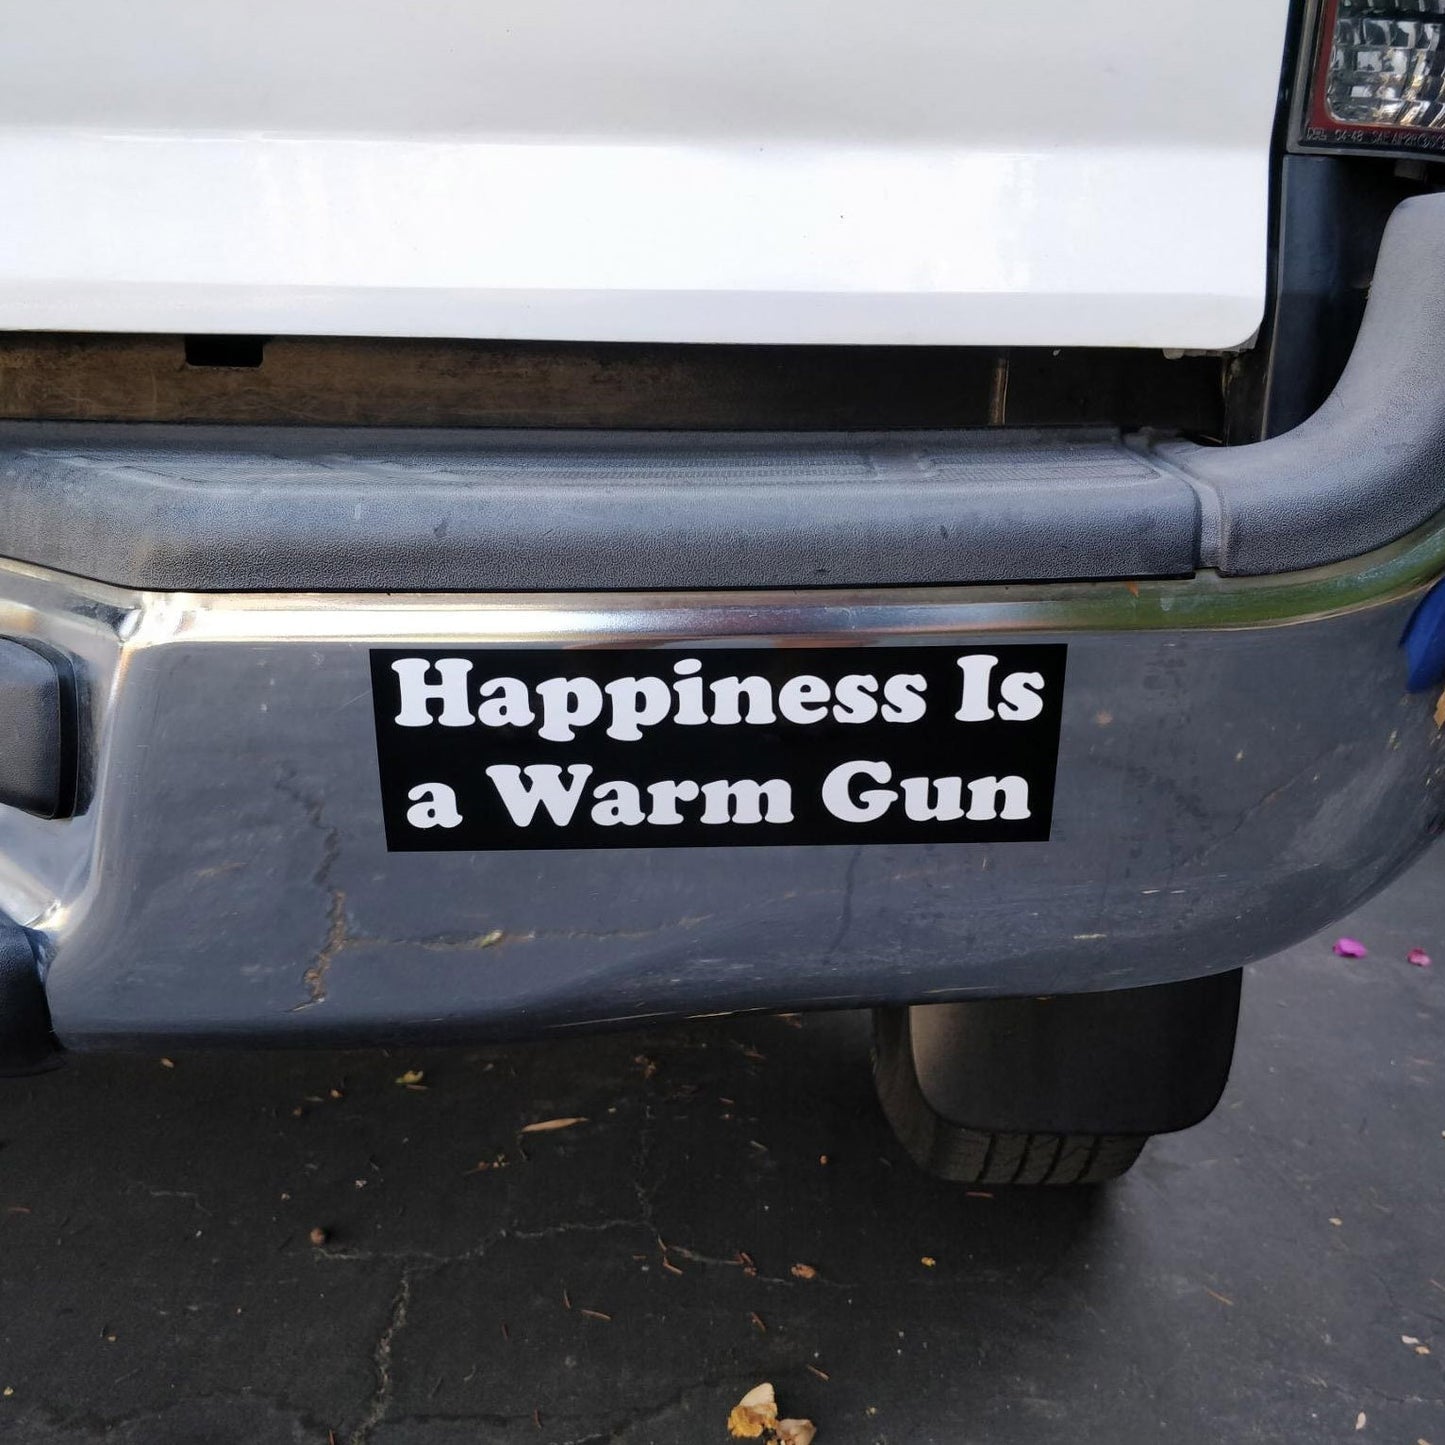 Happiness Is ______ Bumper Sticker